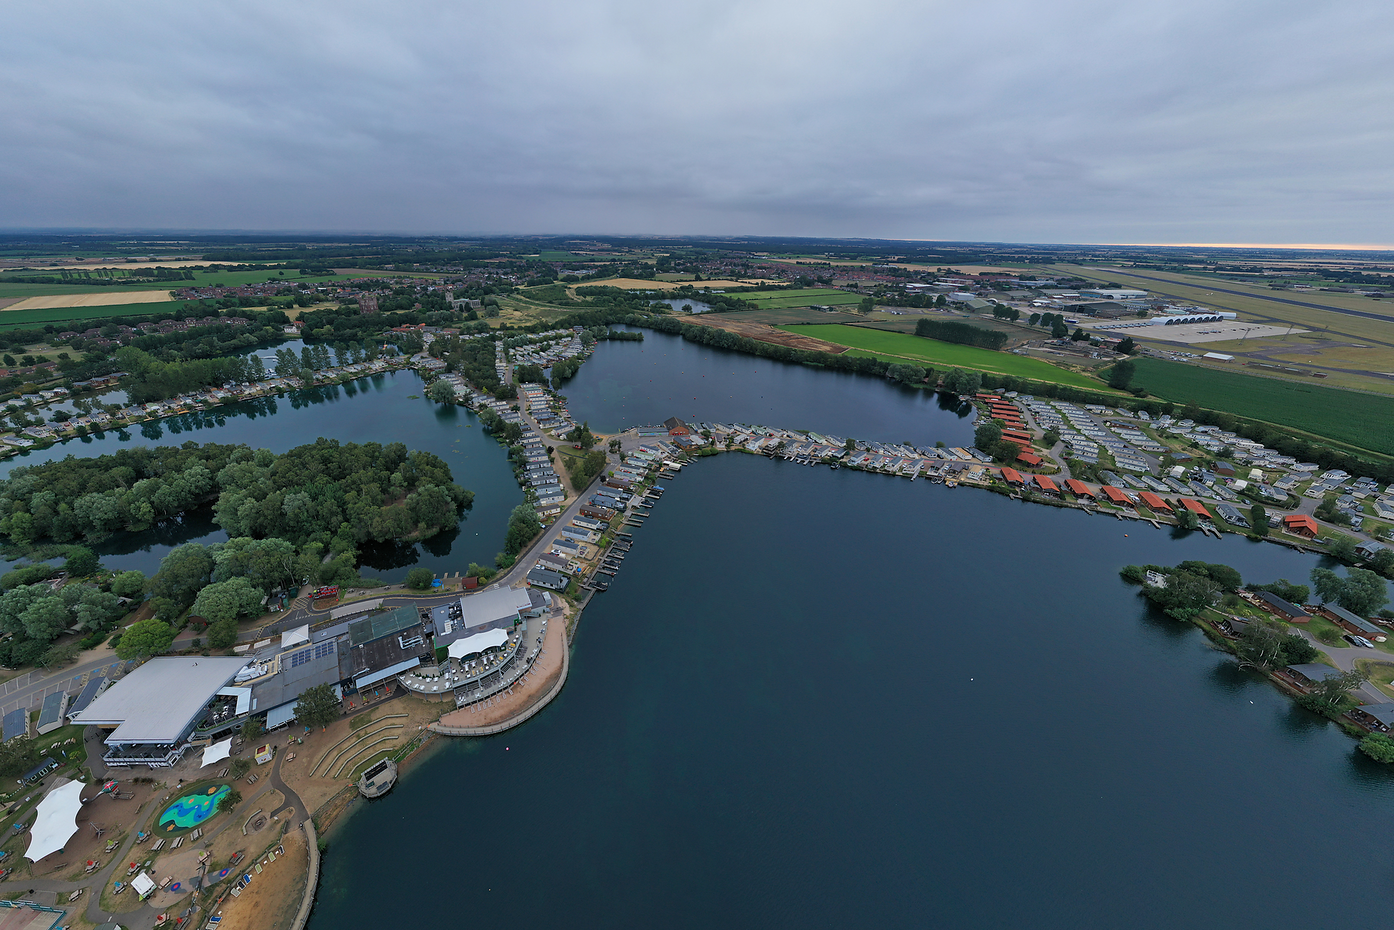 Aearial view of Tattershall Lakes.